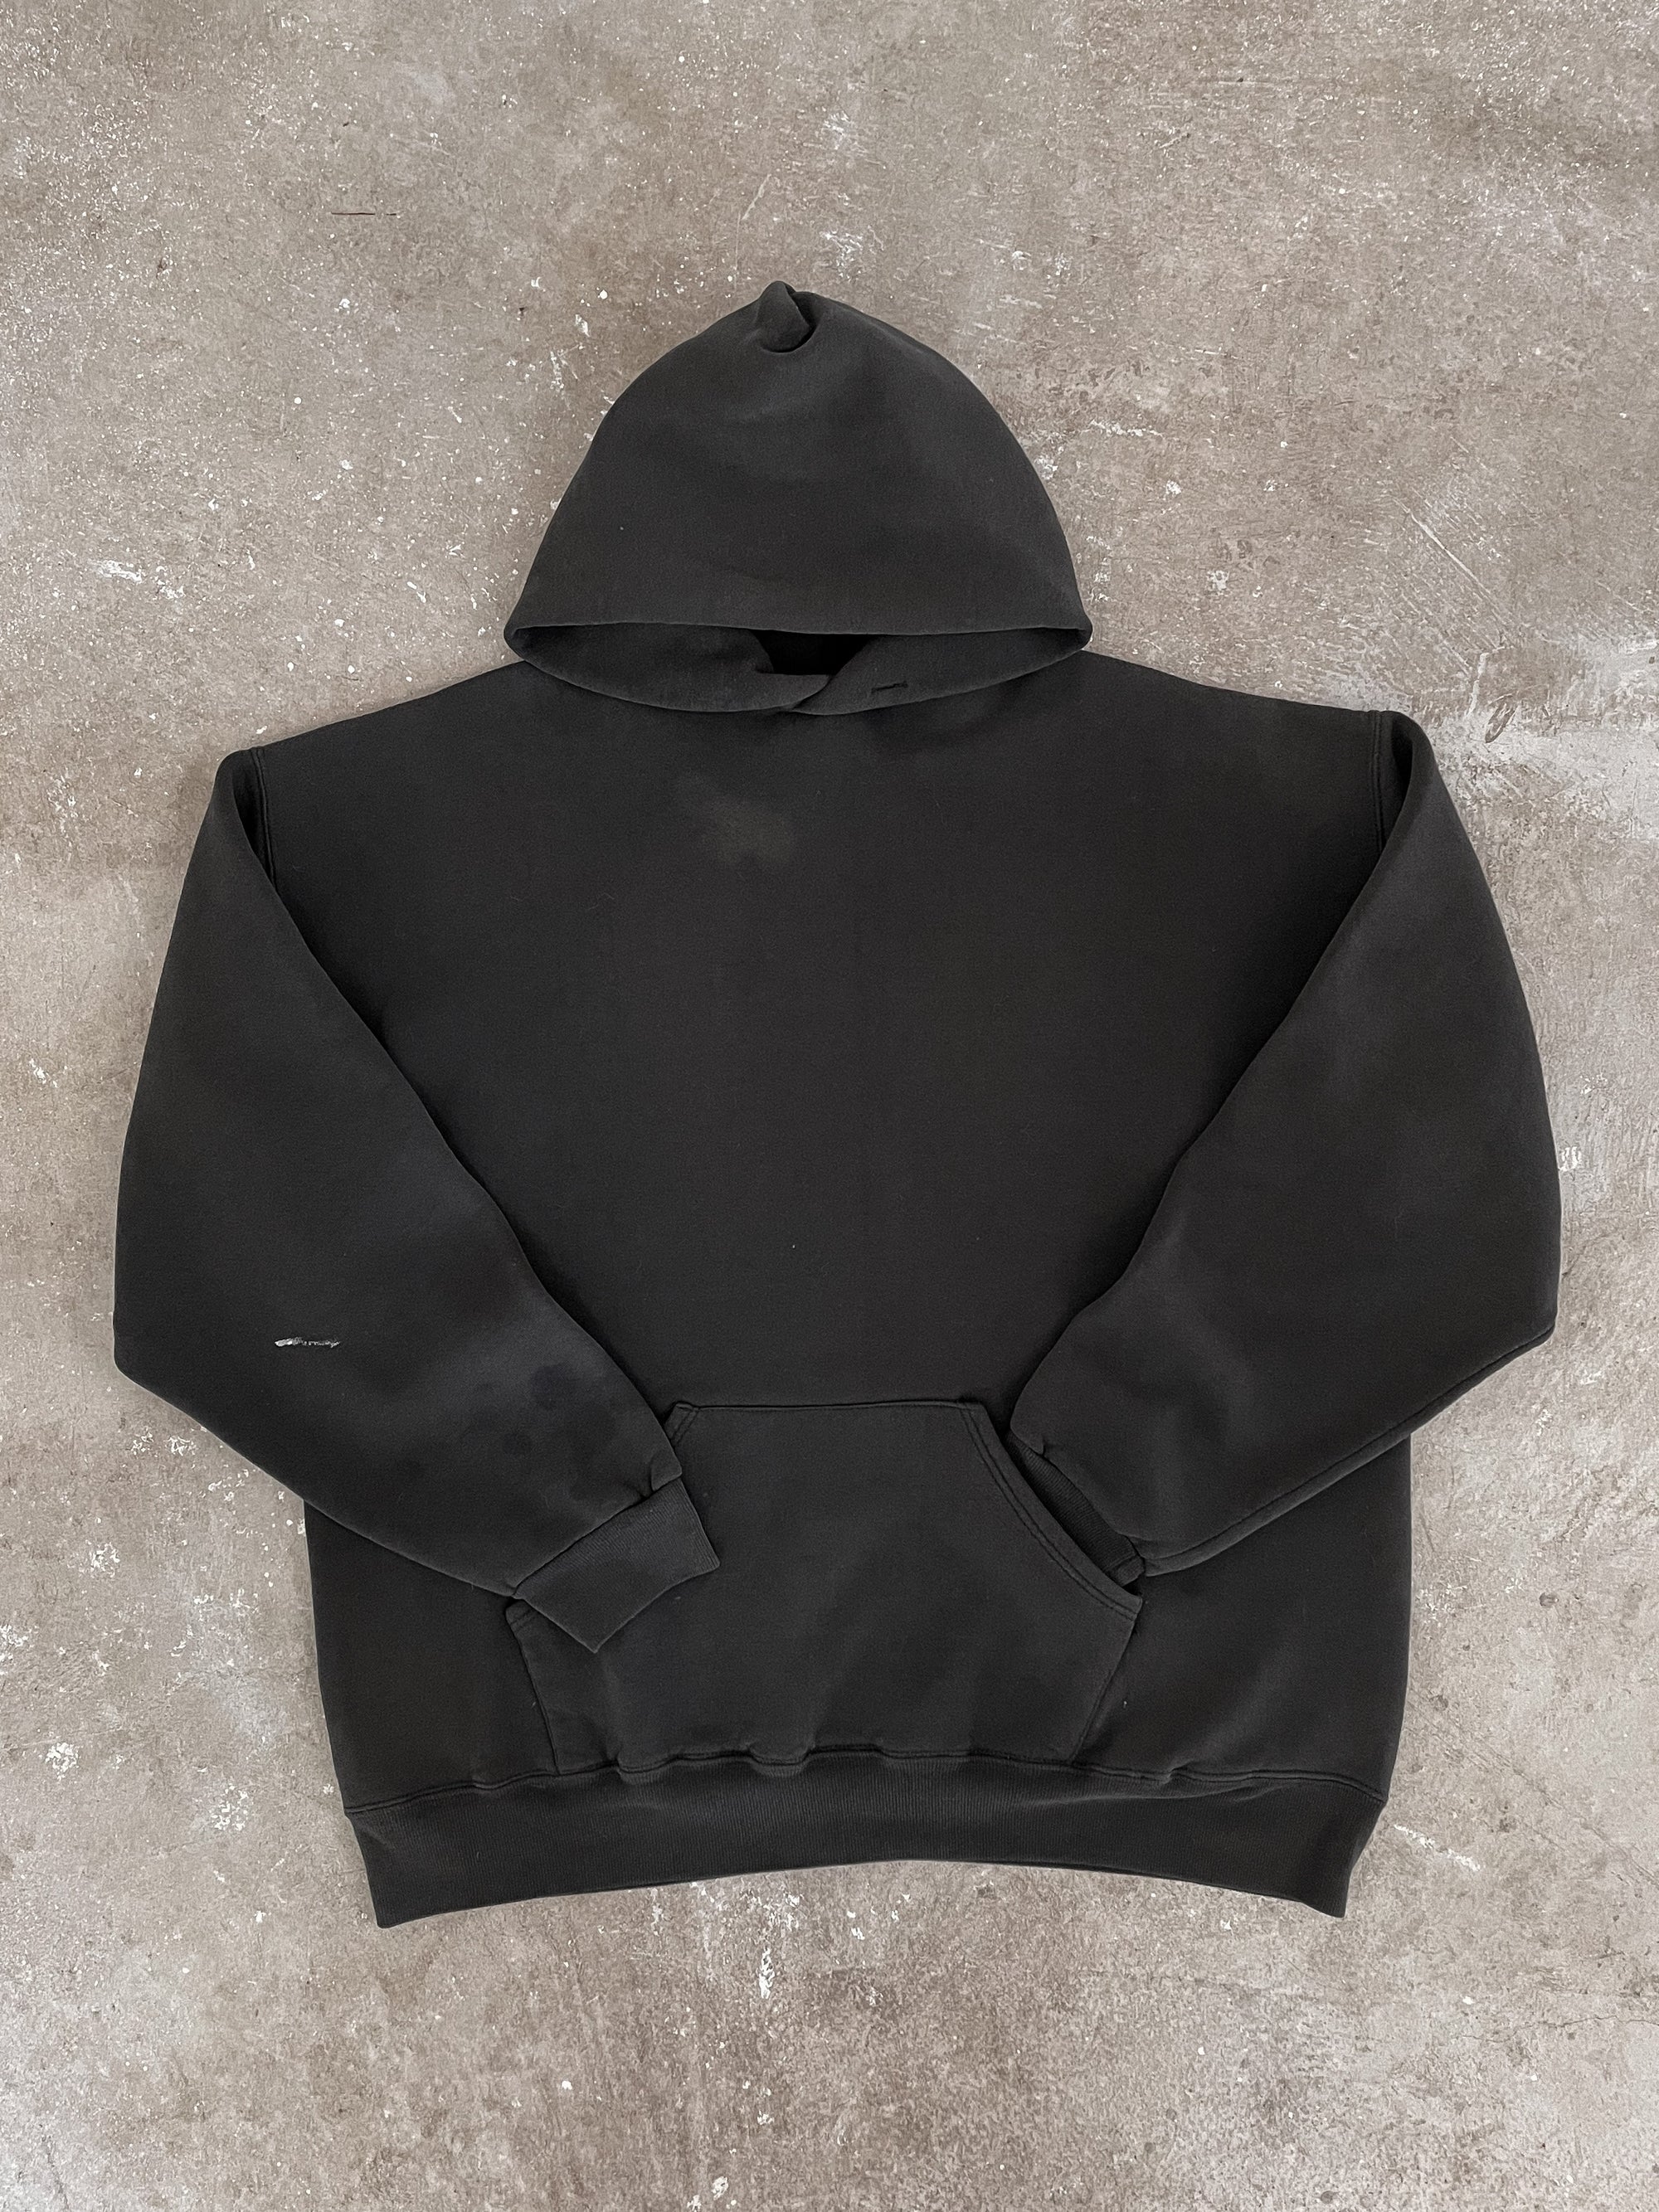 1990s Russell Faded Black Hoodie (XL)